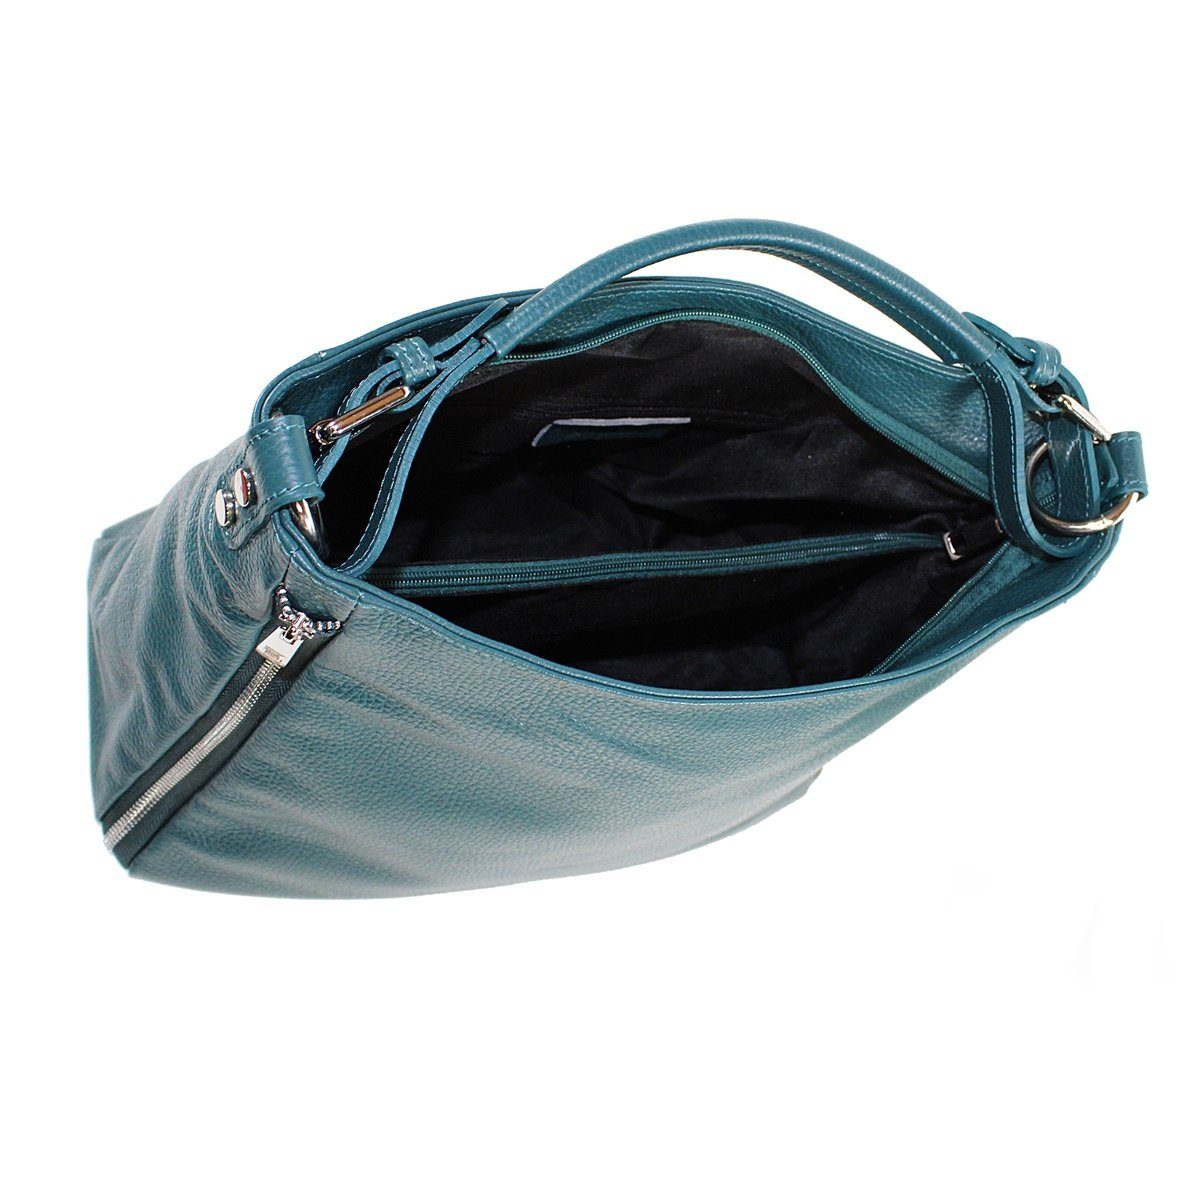 fs-bags Handtasche fs7142, Teal in Made Italy